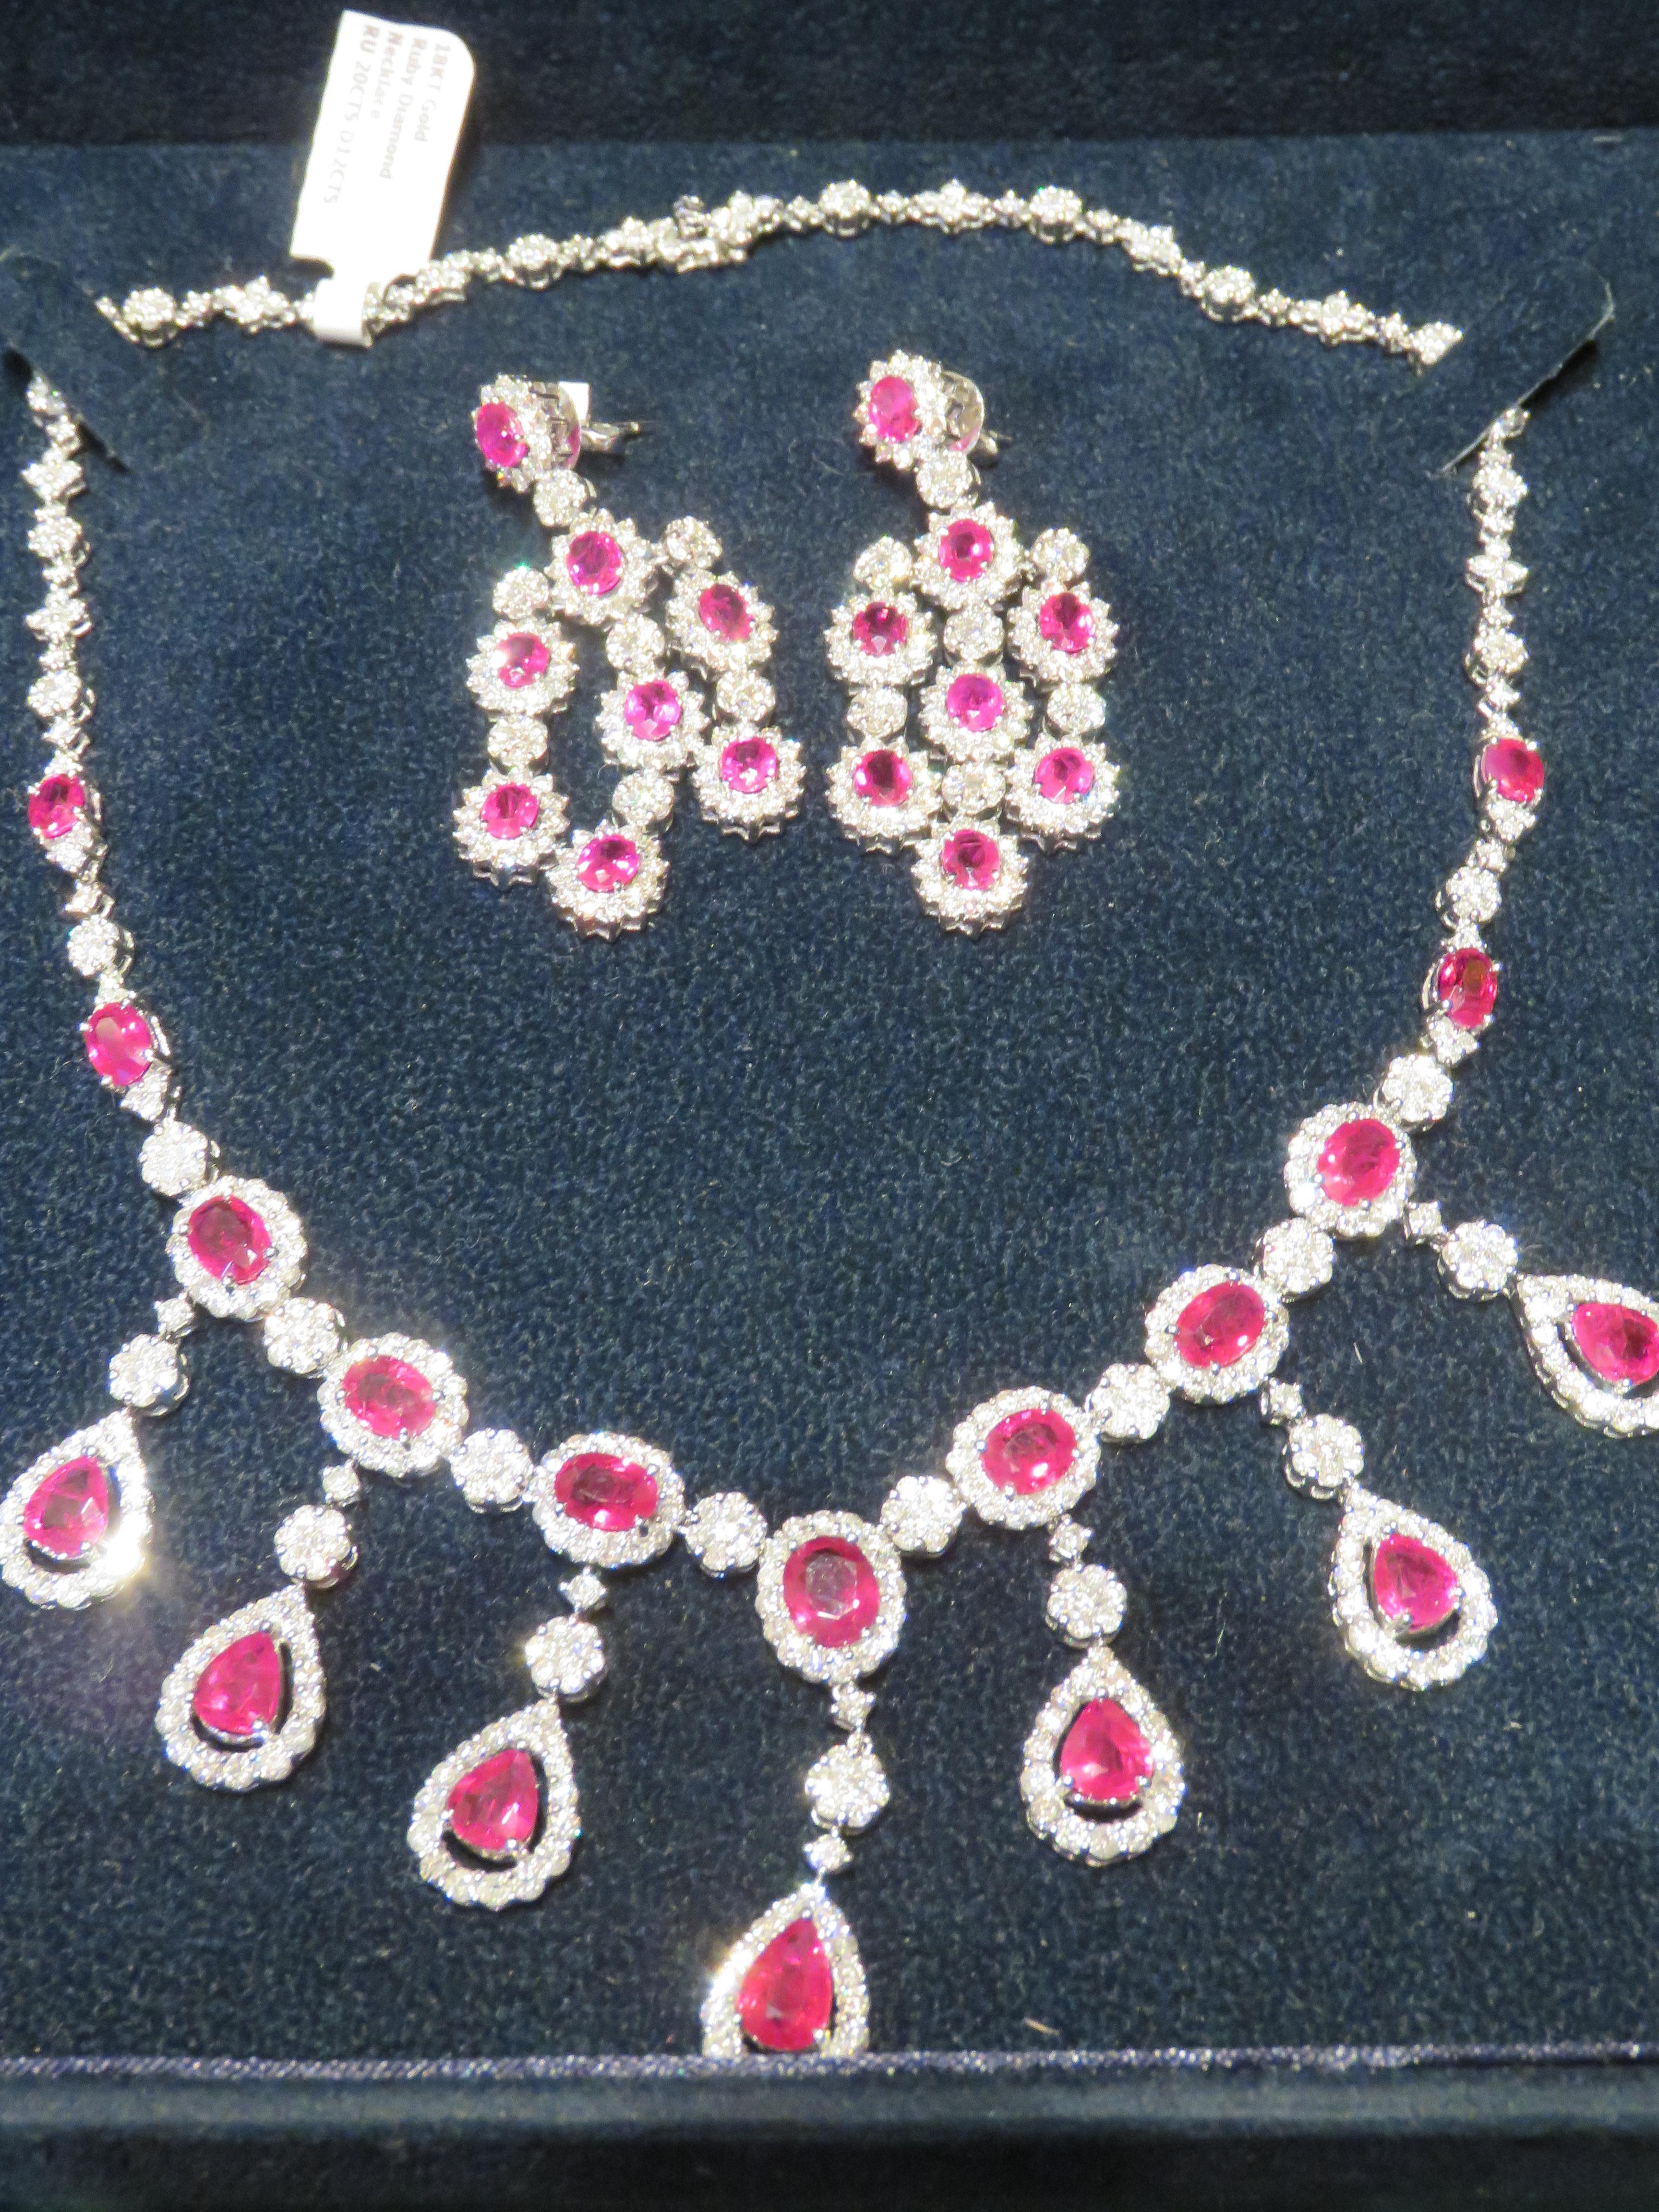 The Following Items we are offering is a Rare Important Radiant 18KT White Gold Necklace and Earring set consisting of Pear and Oval Shaped Glittering Rubies and Magnificent Diamonds Throughout. Features Large Faceted Rubies of the Finest Quality